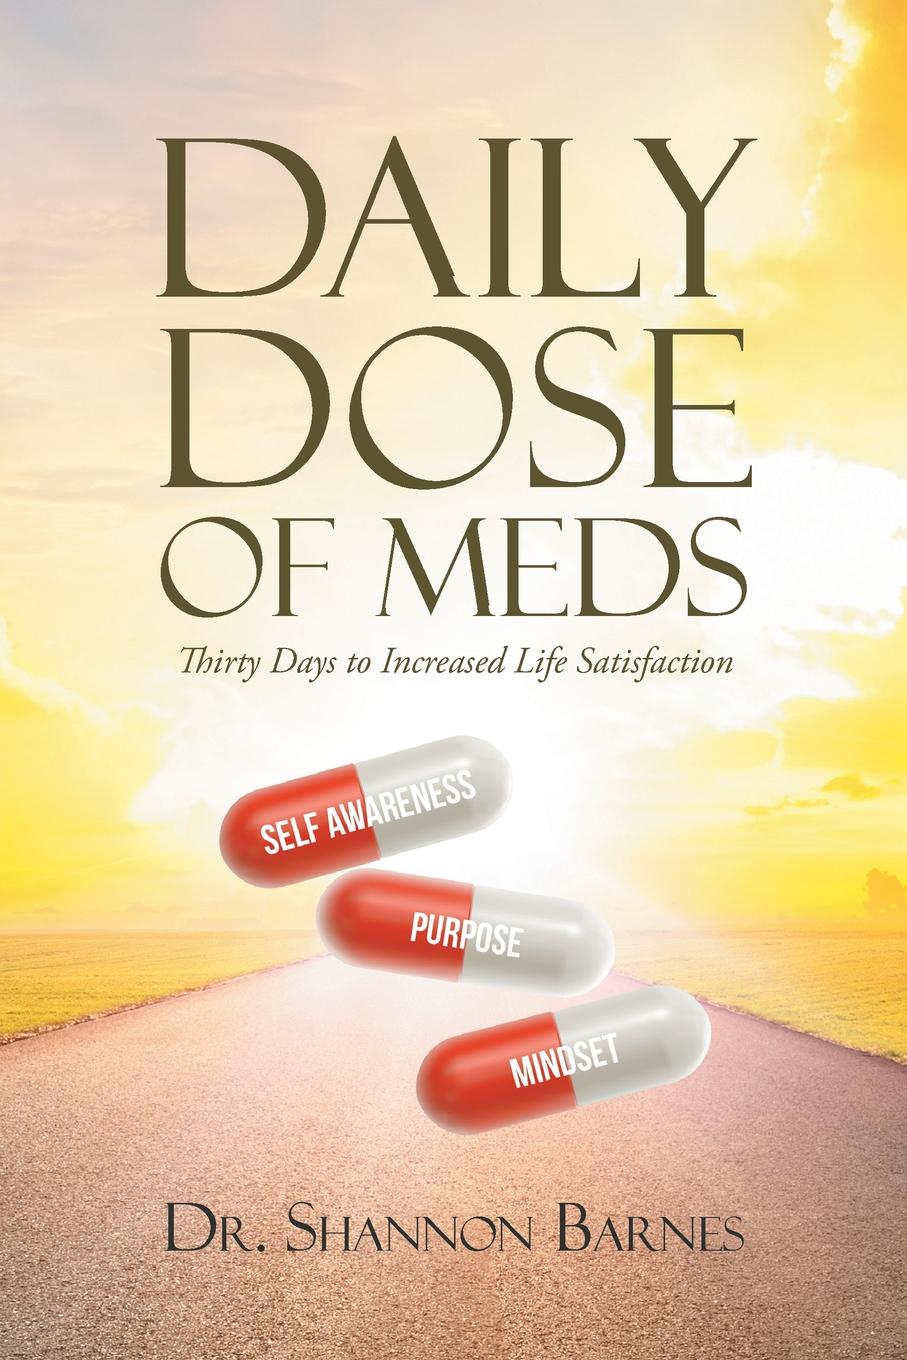 Life is increase. Thirty Days. Daily dose. Happiness Daily. Meds.